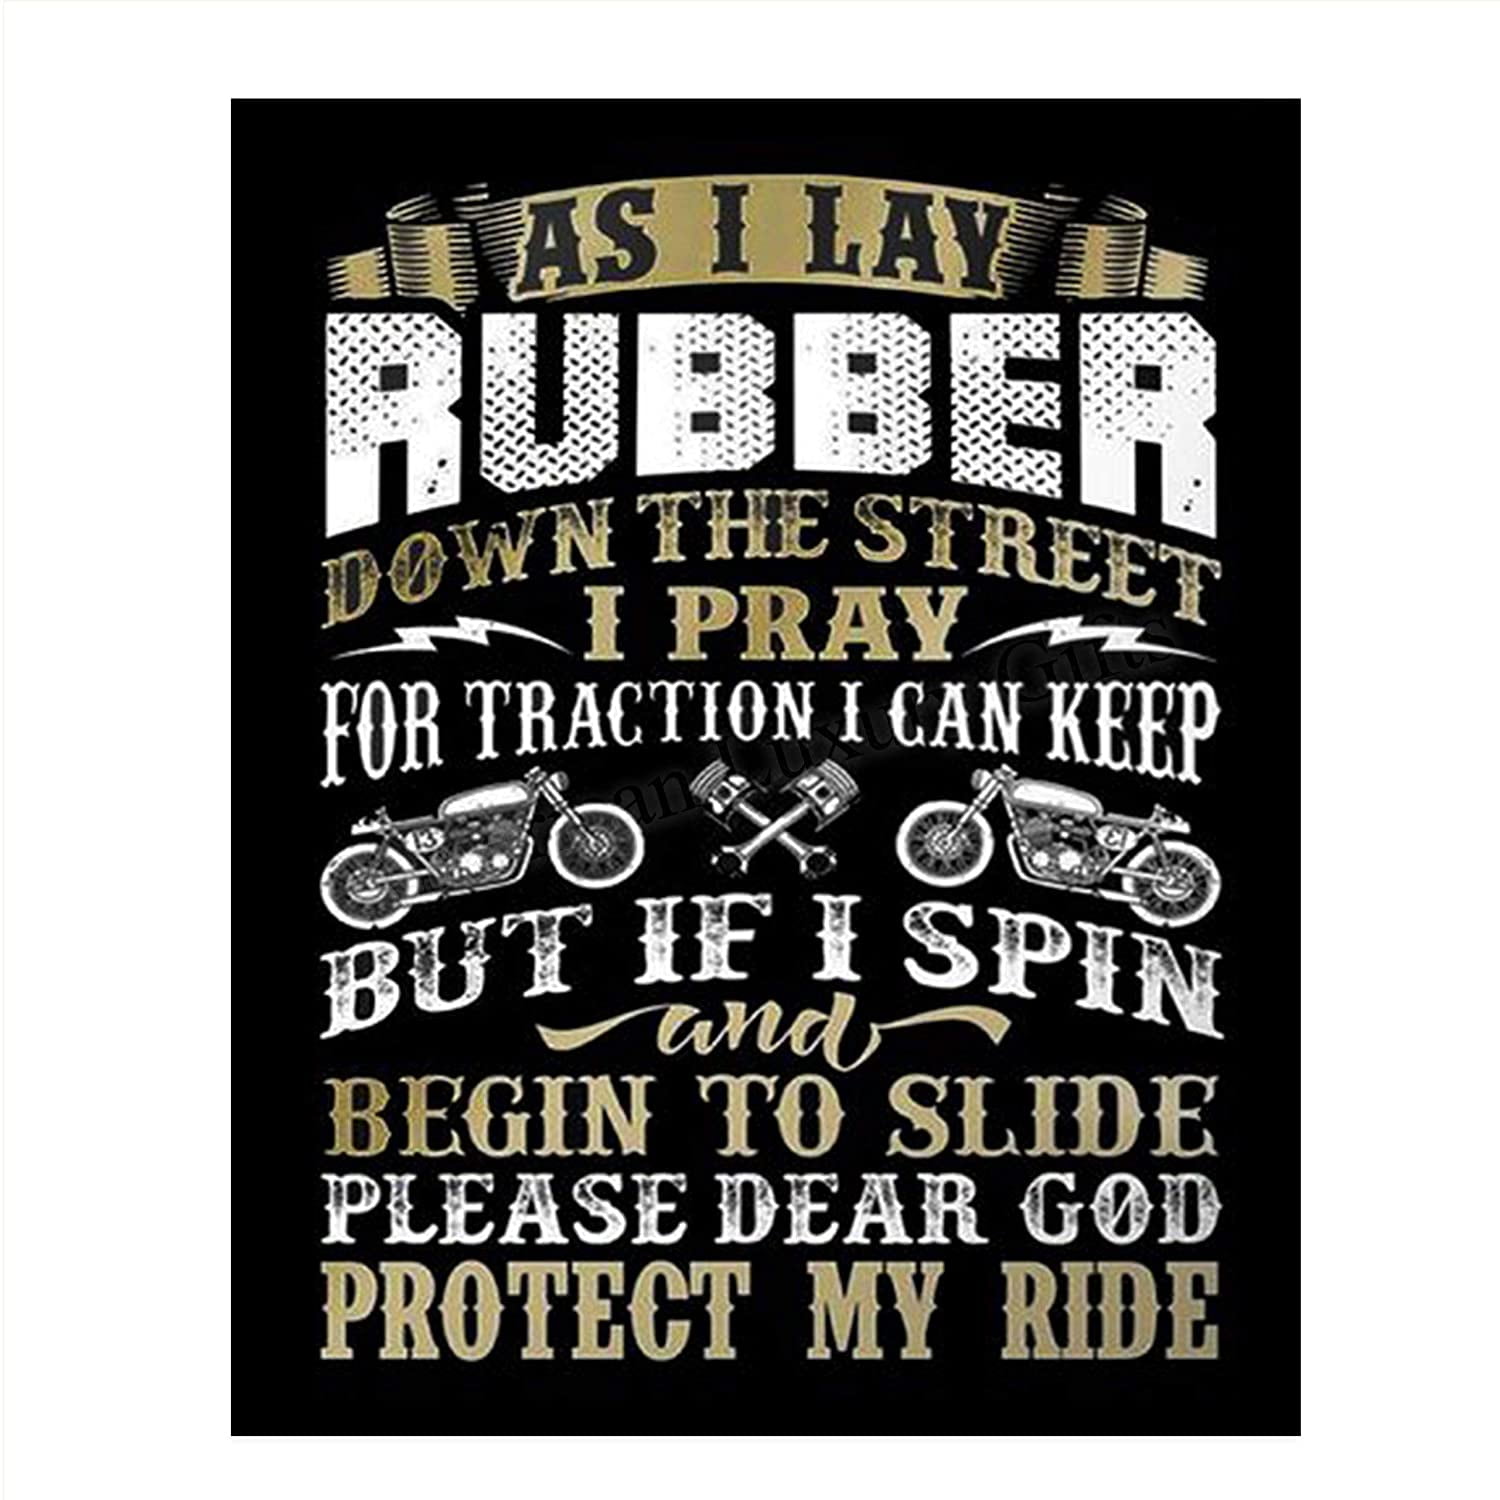 Home-Office Decor Great For Motorcycles & Gearheads. Lay Rubber & Dear God Protect My Ride-Funny Garage Sign Print-8 x10- Wall Decor-Ready To Frame Great Mens Gift Great for Man Cave-Bar-Garage 